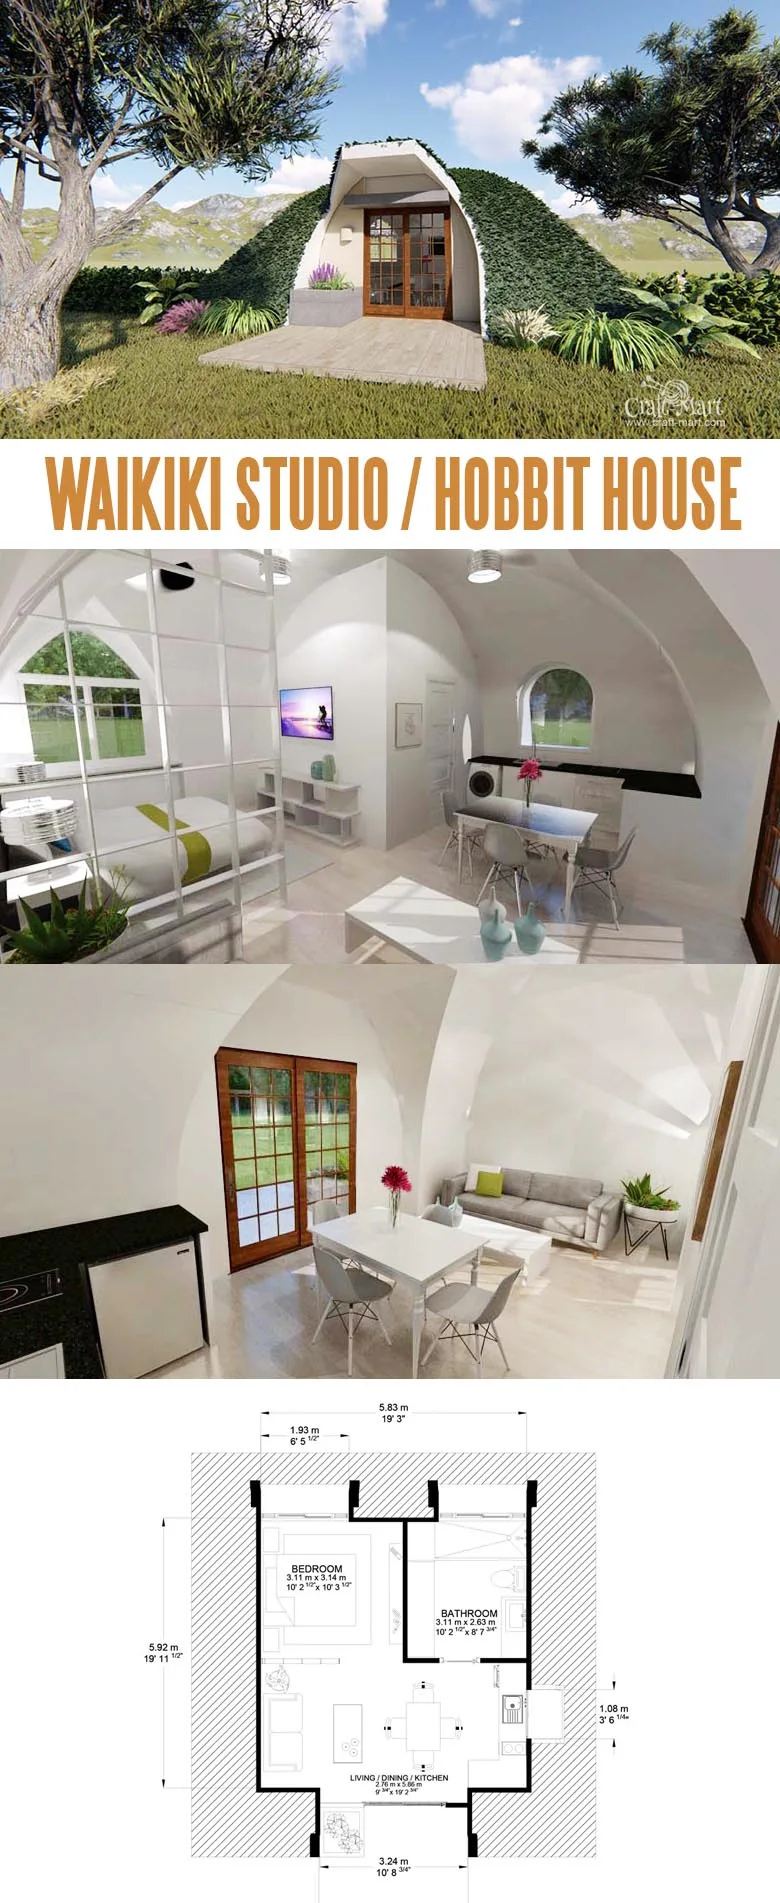 Waikiki Tiny Hobbit House. Tiny modular units can be interconnected creating luxury Hobbit estates. See the mazing line of prefabricated Hobbit-style homes that are low maintenance and energy efficient.